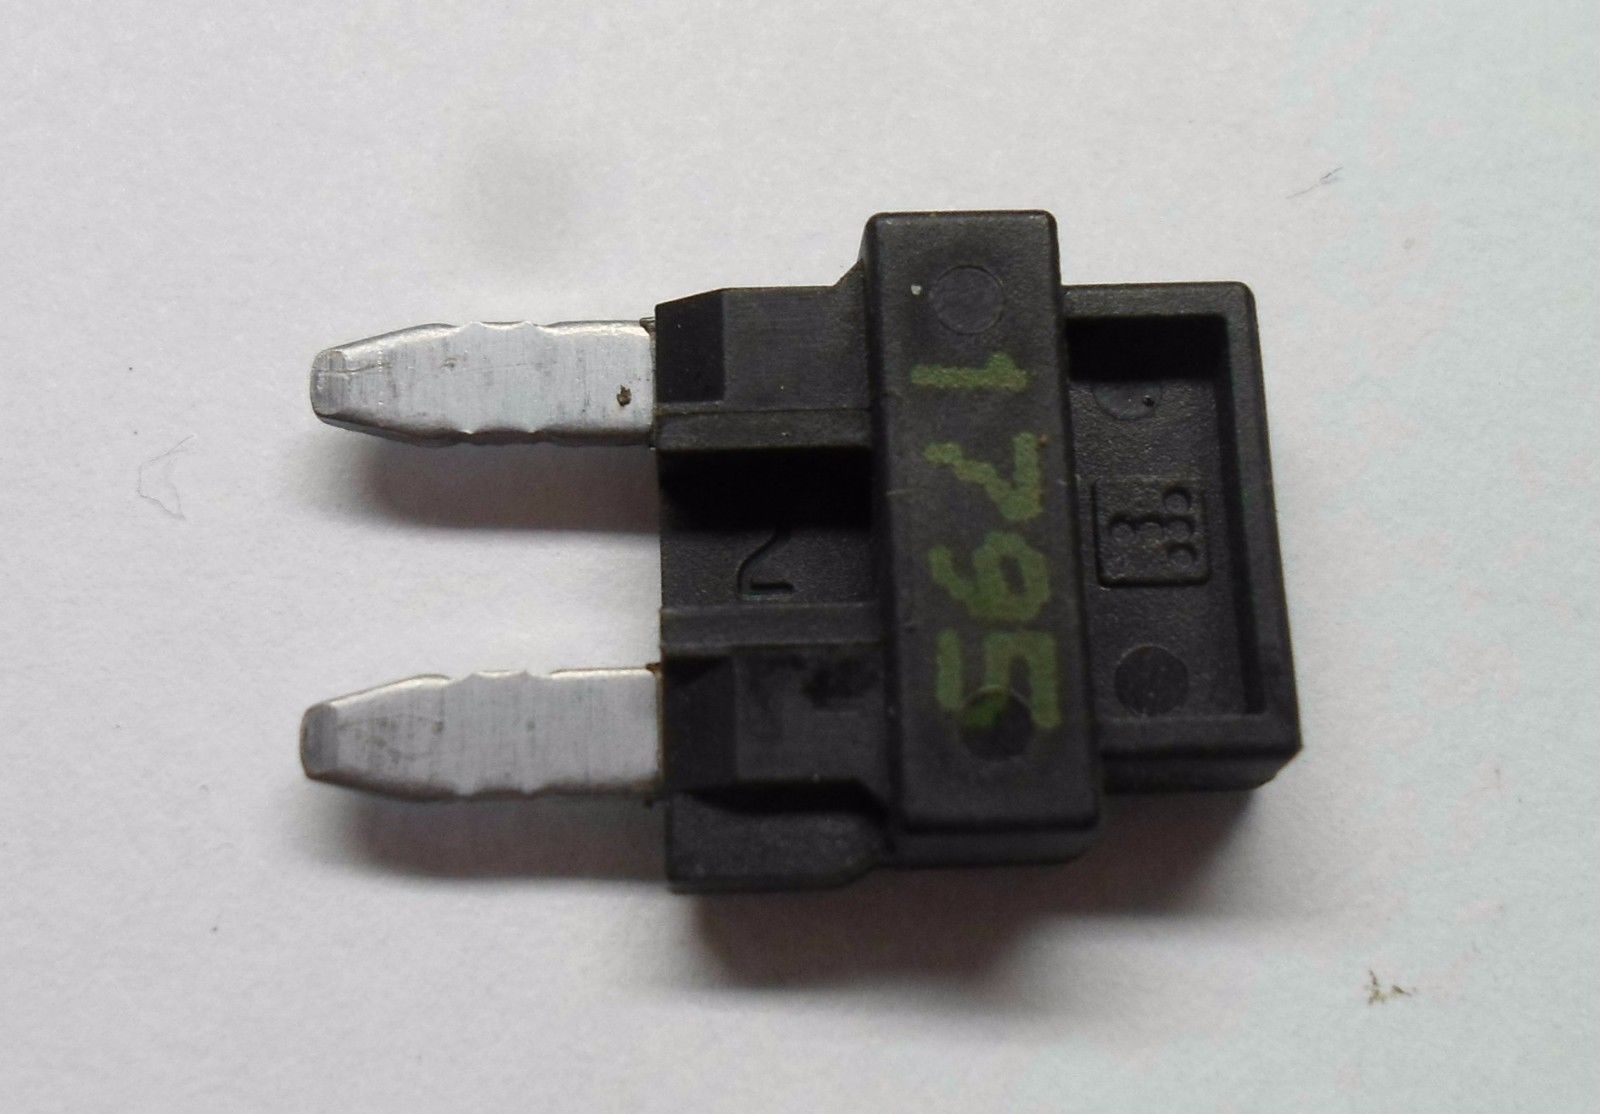 GM OEM DIODE 12135037 TESTED 6 MONTH WARRANTY  FREE SHIPPING!  GM2